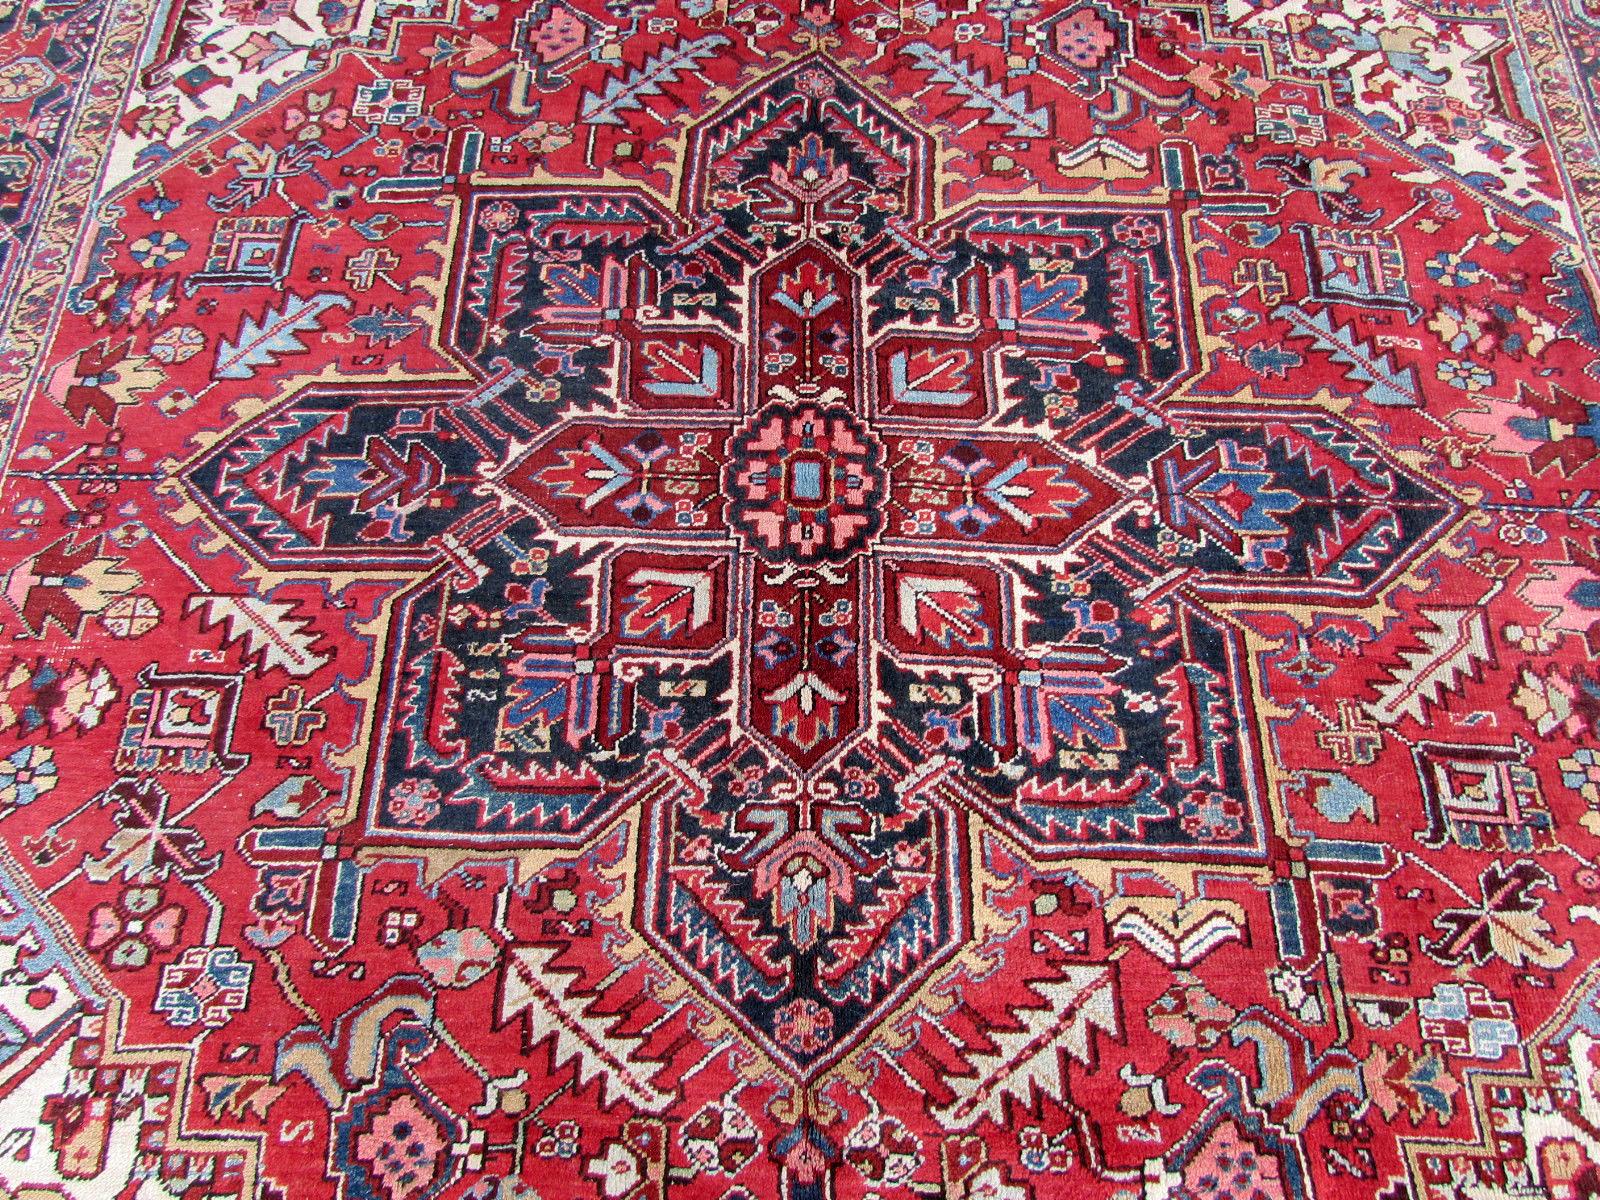 Handmade antique Heriz rug in red wool. The rug is from the beginning of 20th century, it is in original condition, has some low pile.

- Condition: original, some low pile,

- circa 1930s,

- Size: 8.5' x 11.2' (253cm x 335cm),

- Material: